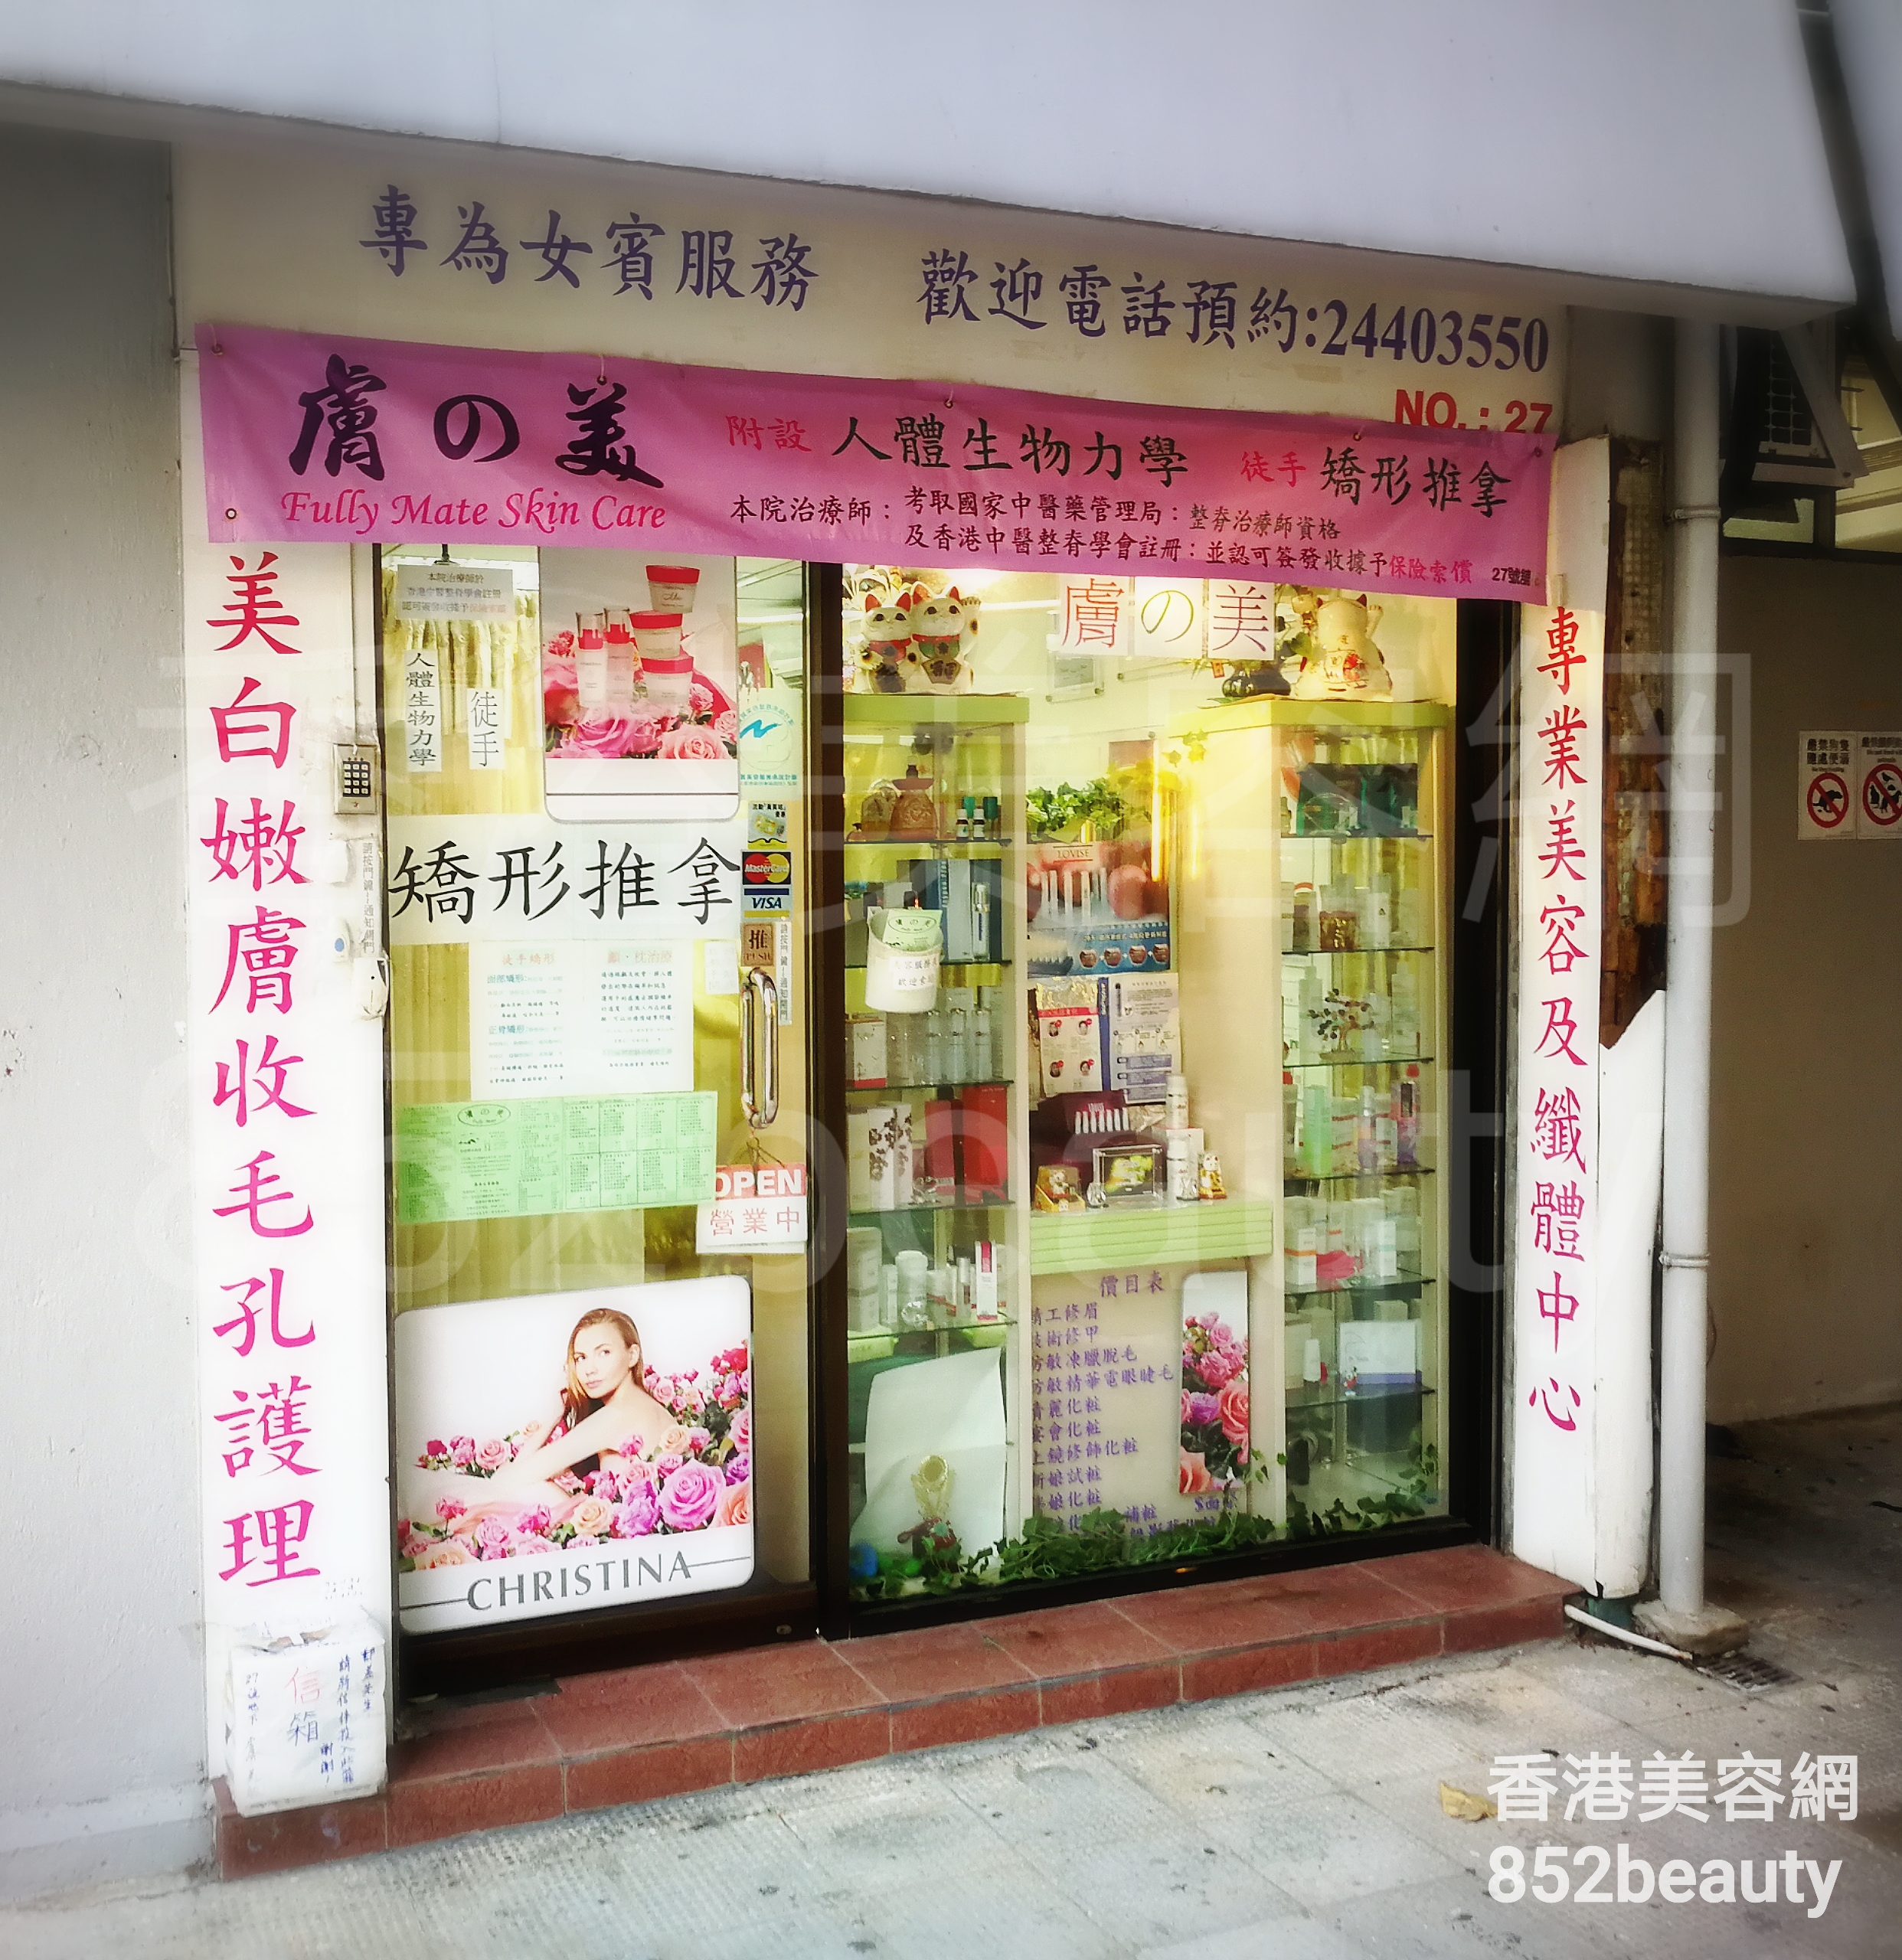 Hand and foot care: 膚の美